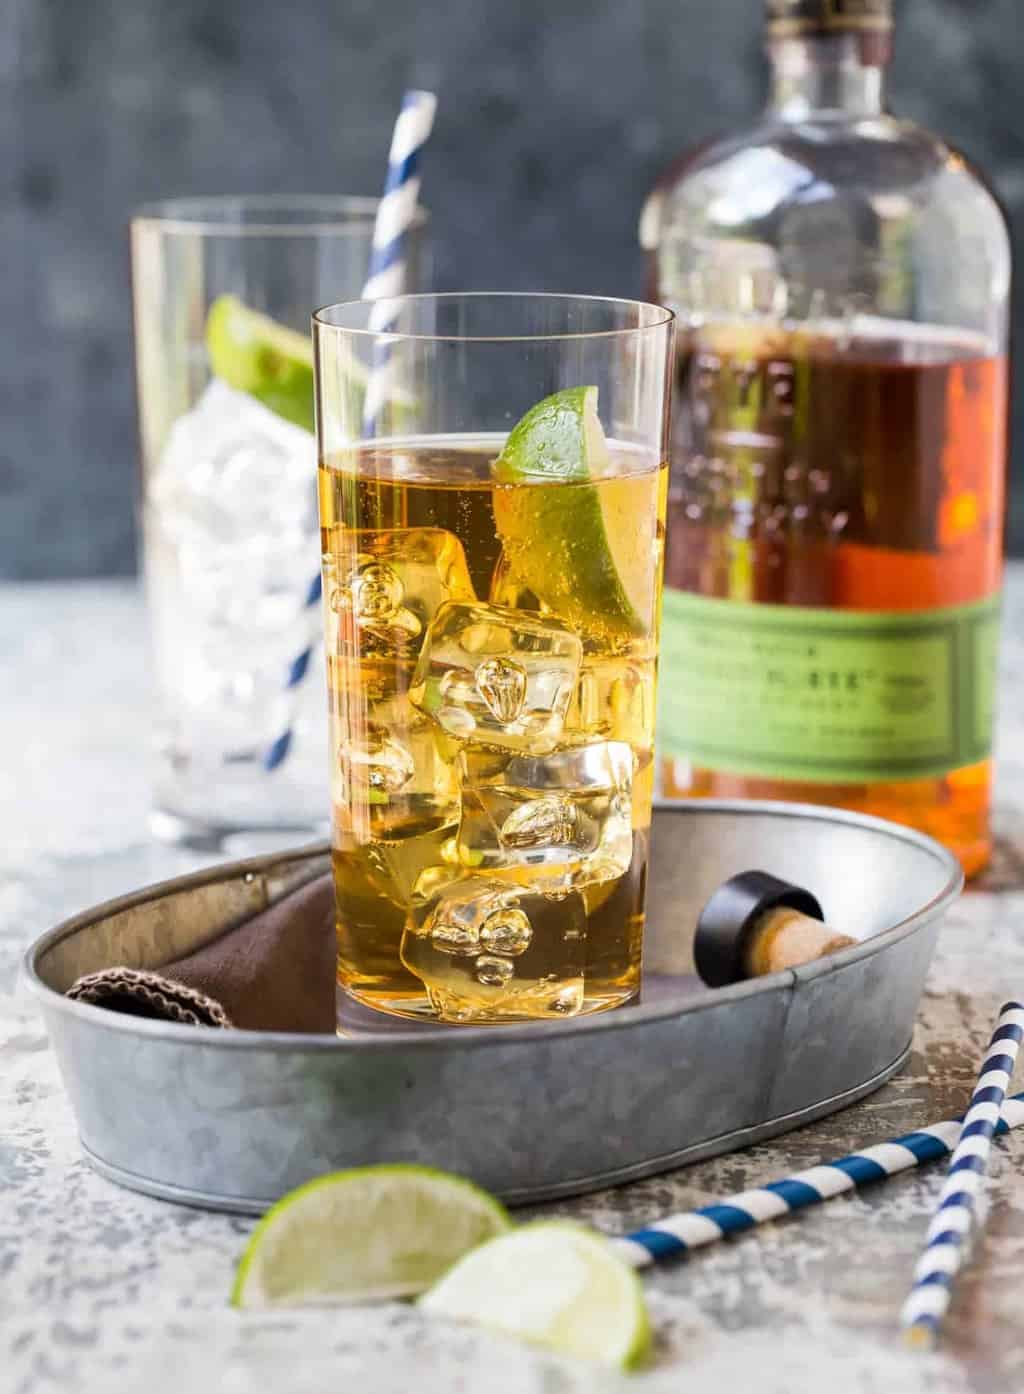 EASY Whiskey Ginger Cocktail (just 3 ingredients!) - Garnish with Lemon